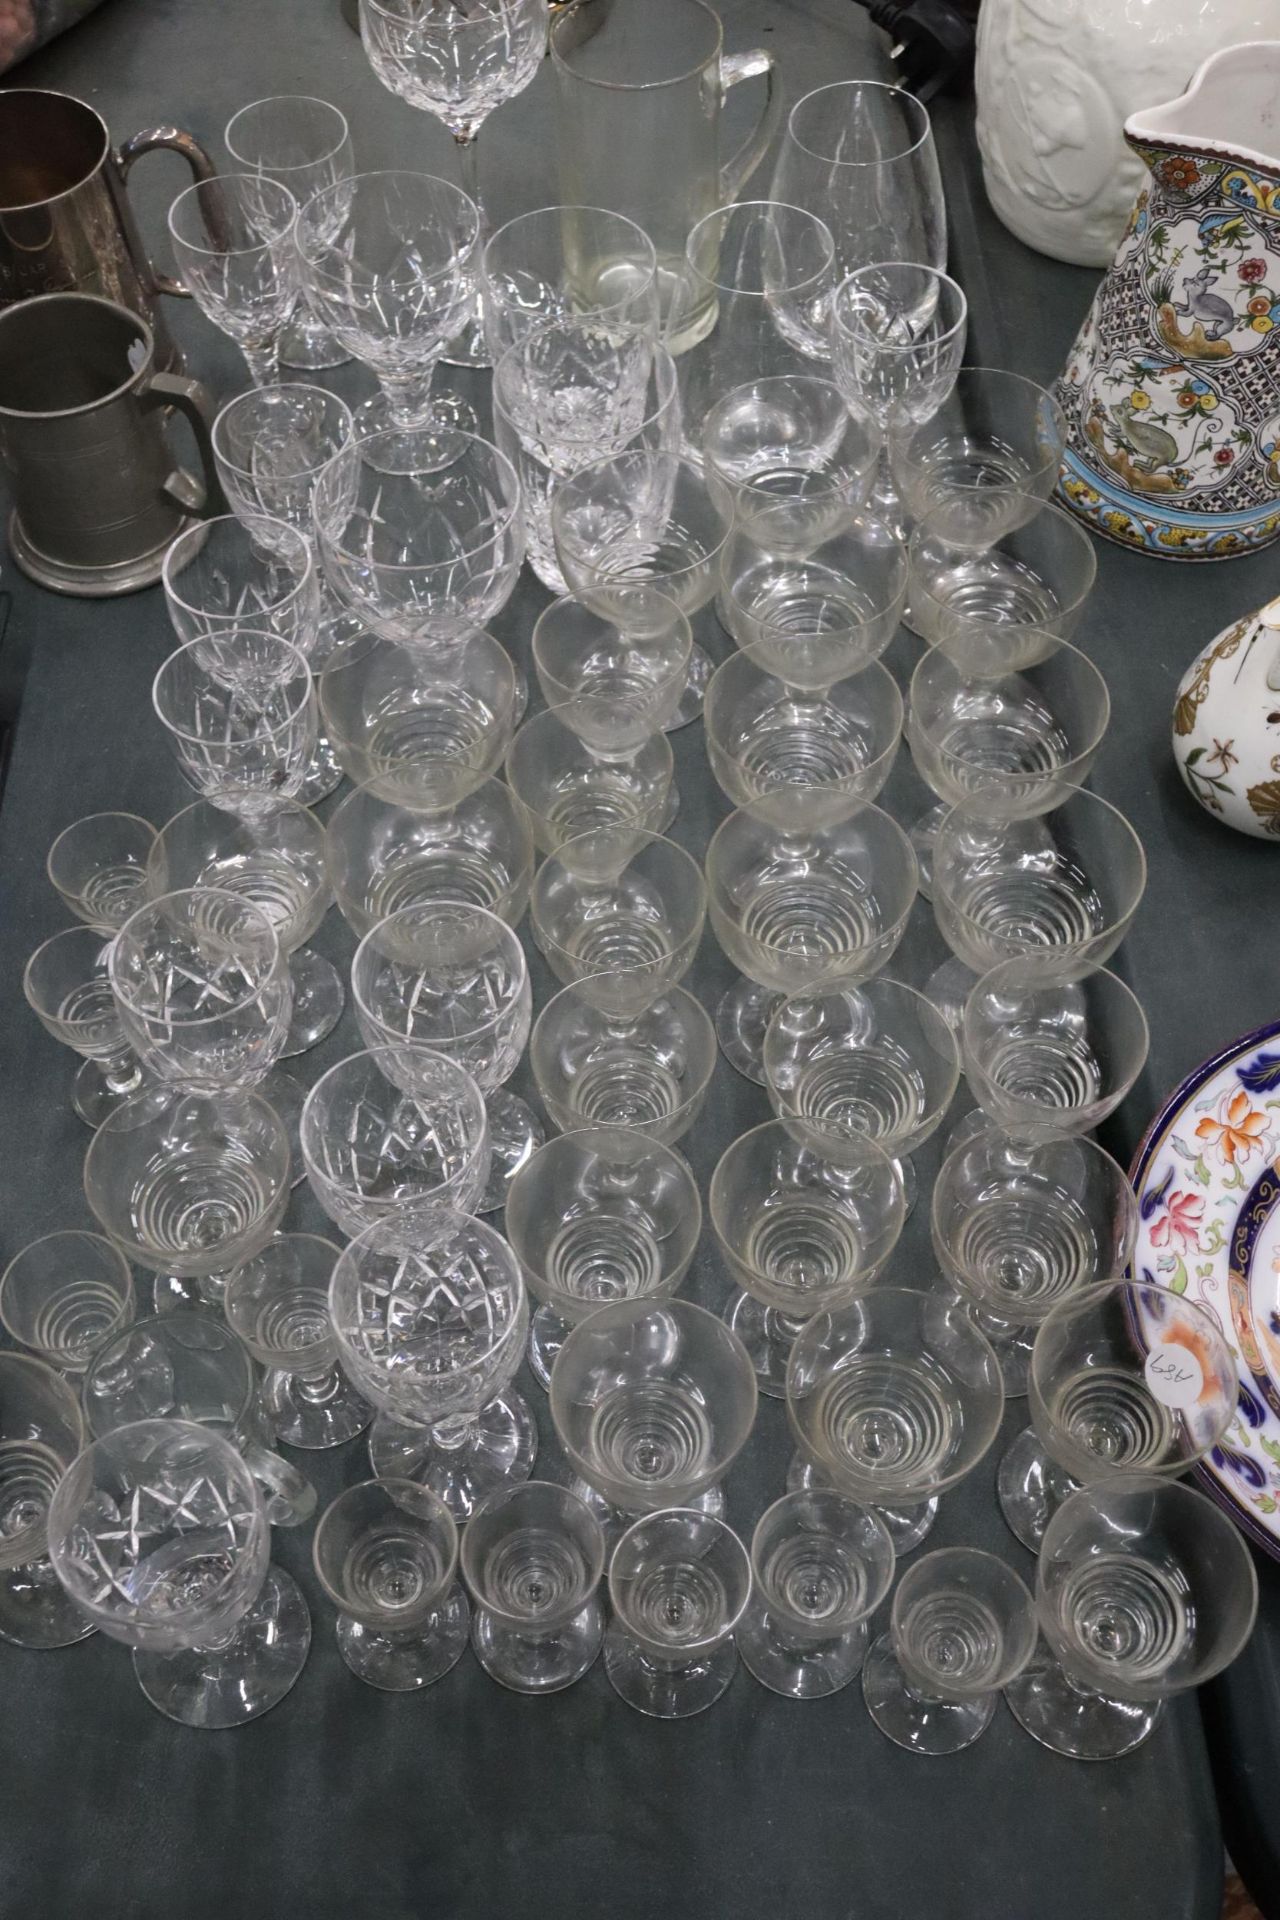 A LARGE QUANTITY OF GLASSES TO INCLUDE SHERRY, LIQUER, TUMBLERS, ETC